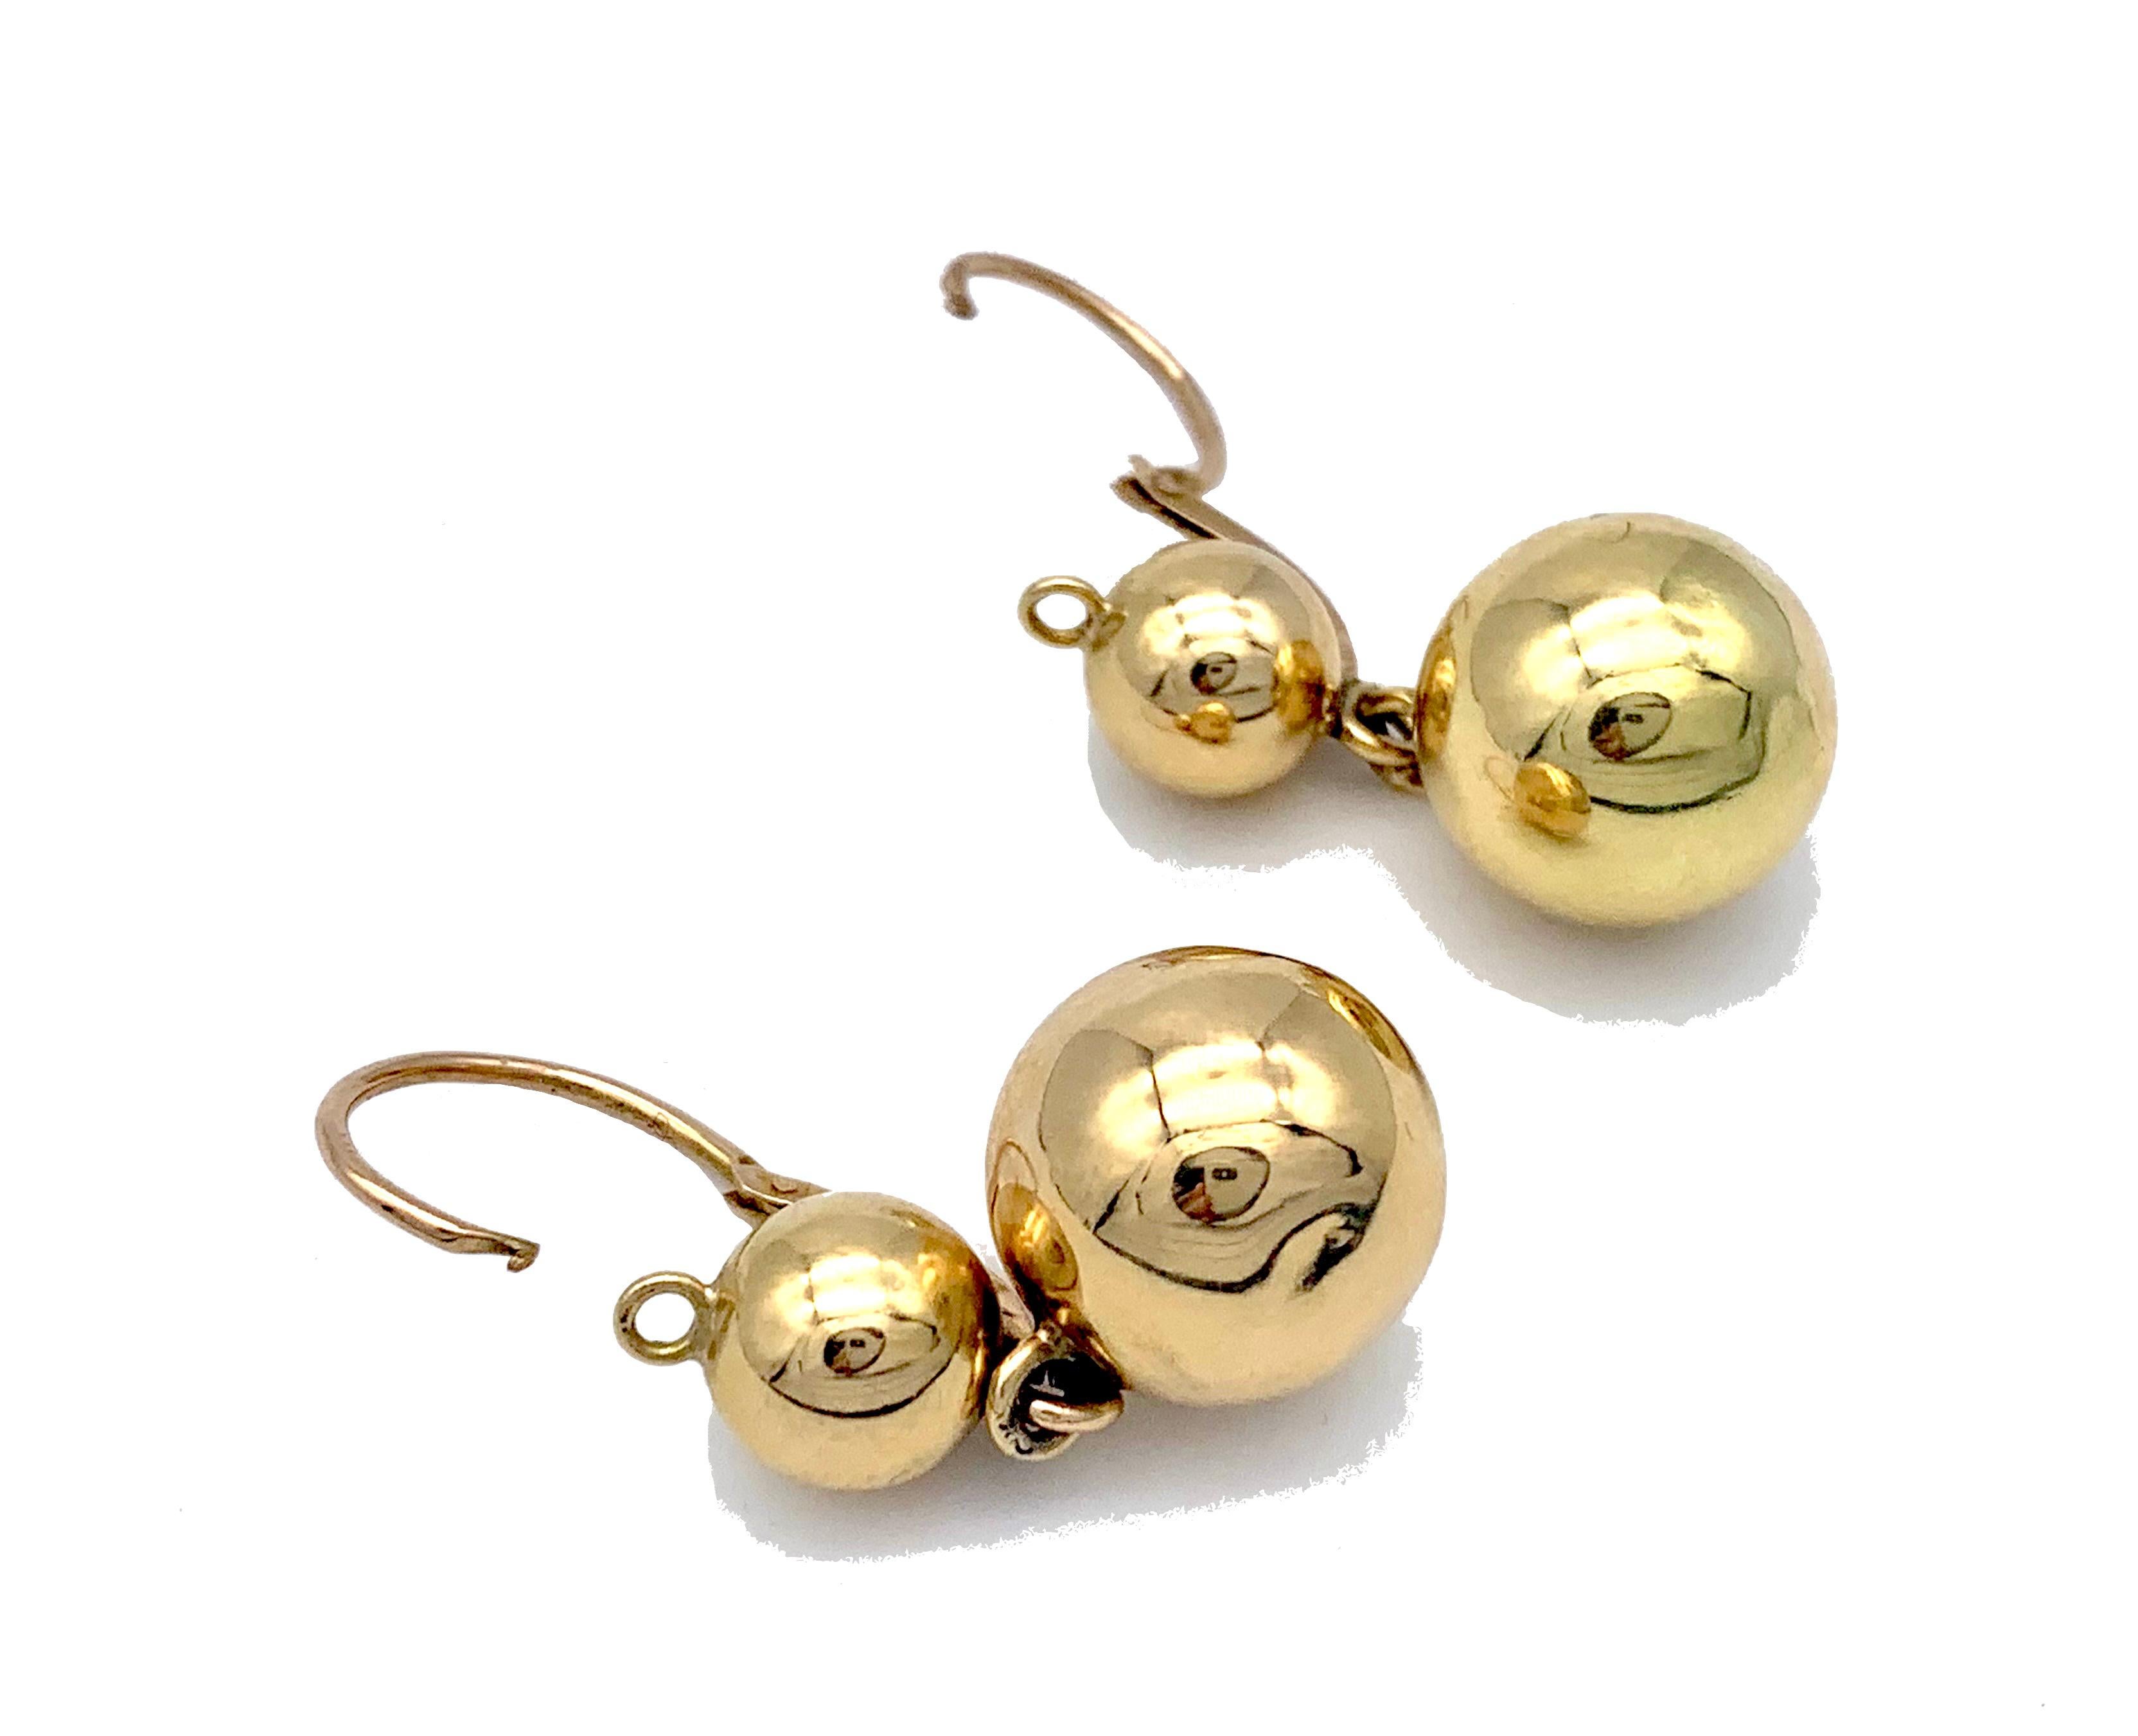 These elegant dangling earrings were made in France around 1880 out of 18 karat gold. The hooks are impressed with French hallmarks. The ball motive is always attractive, reflecting the the light and the surroundings. The earrings are in fine